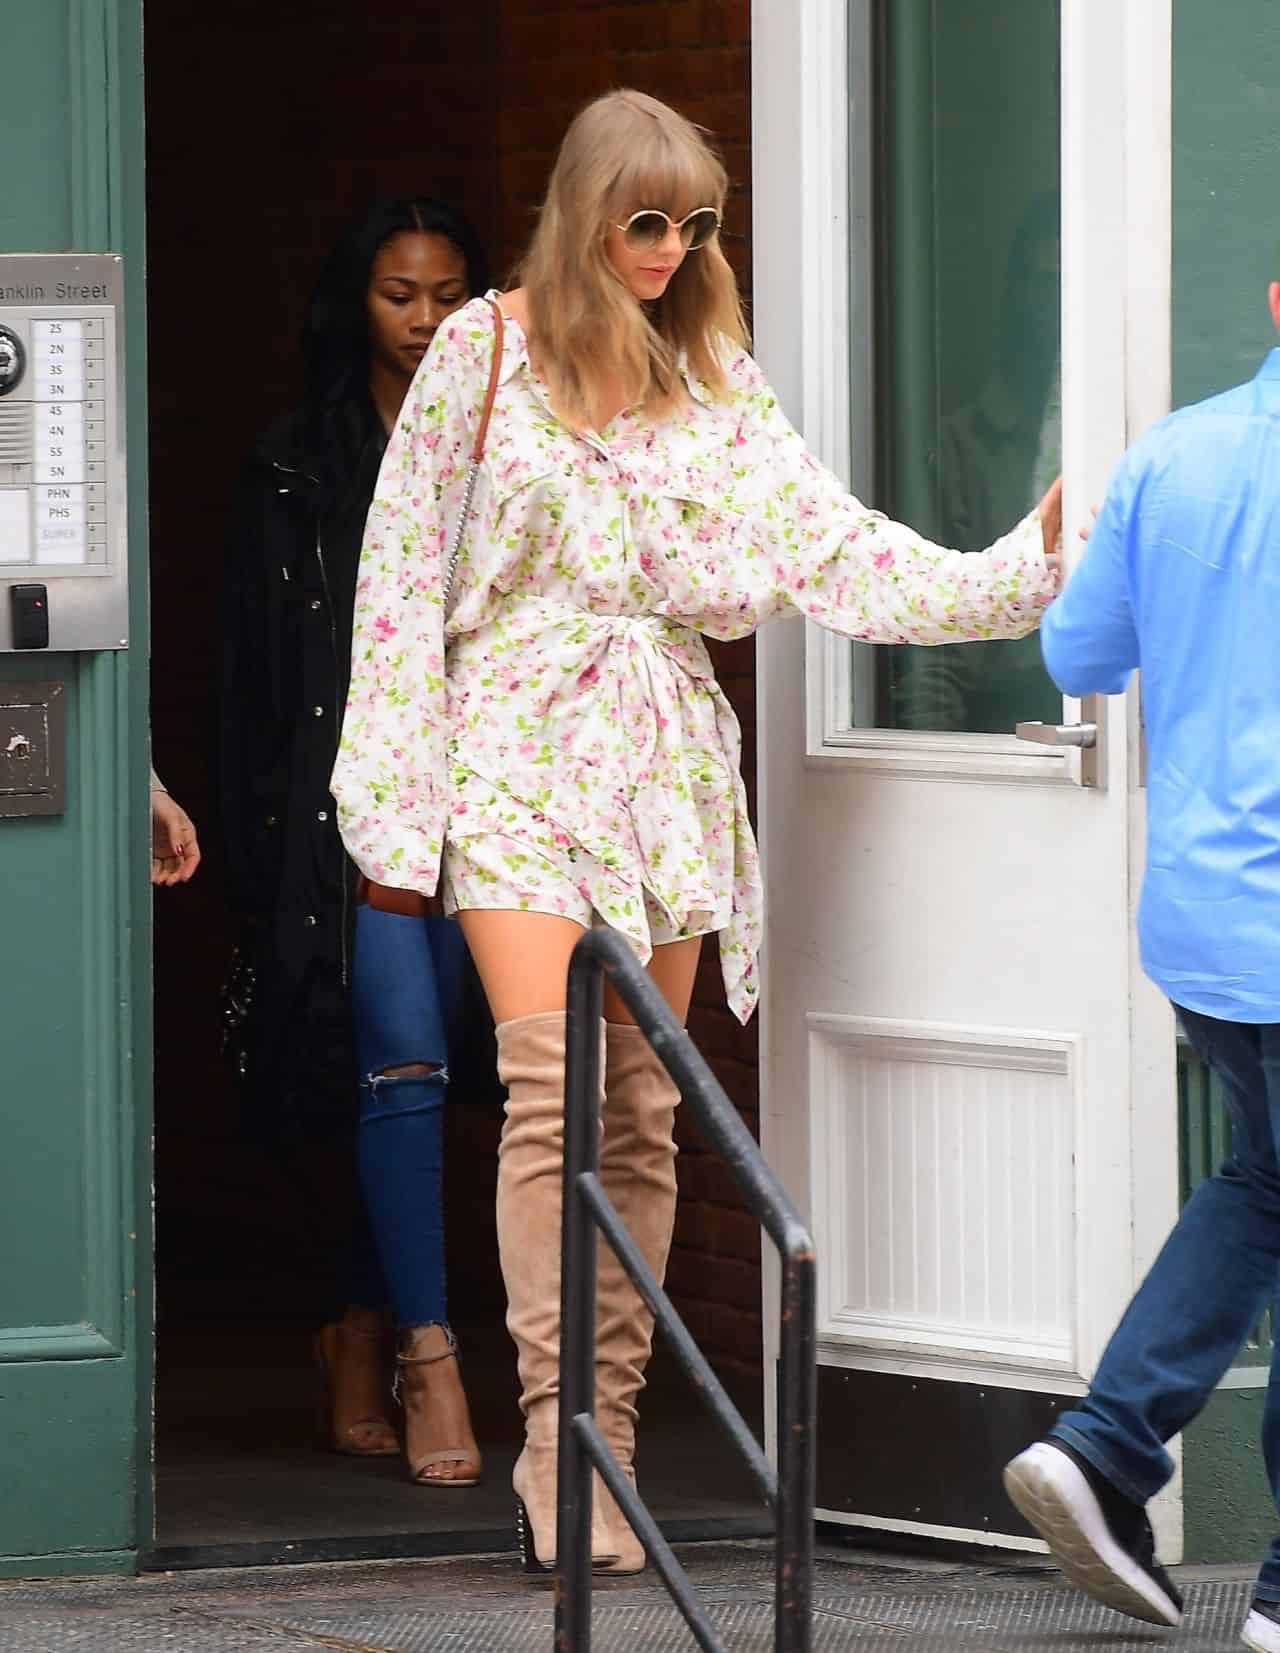 Taylor Swift Turns Up the Summer Style with Thigh-High Boots